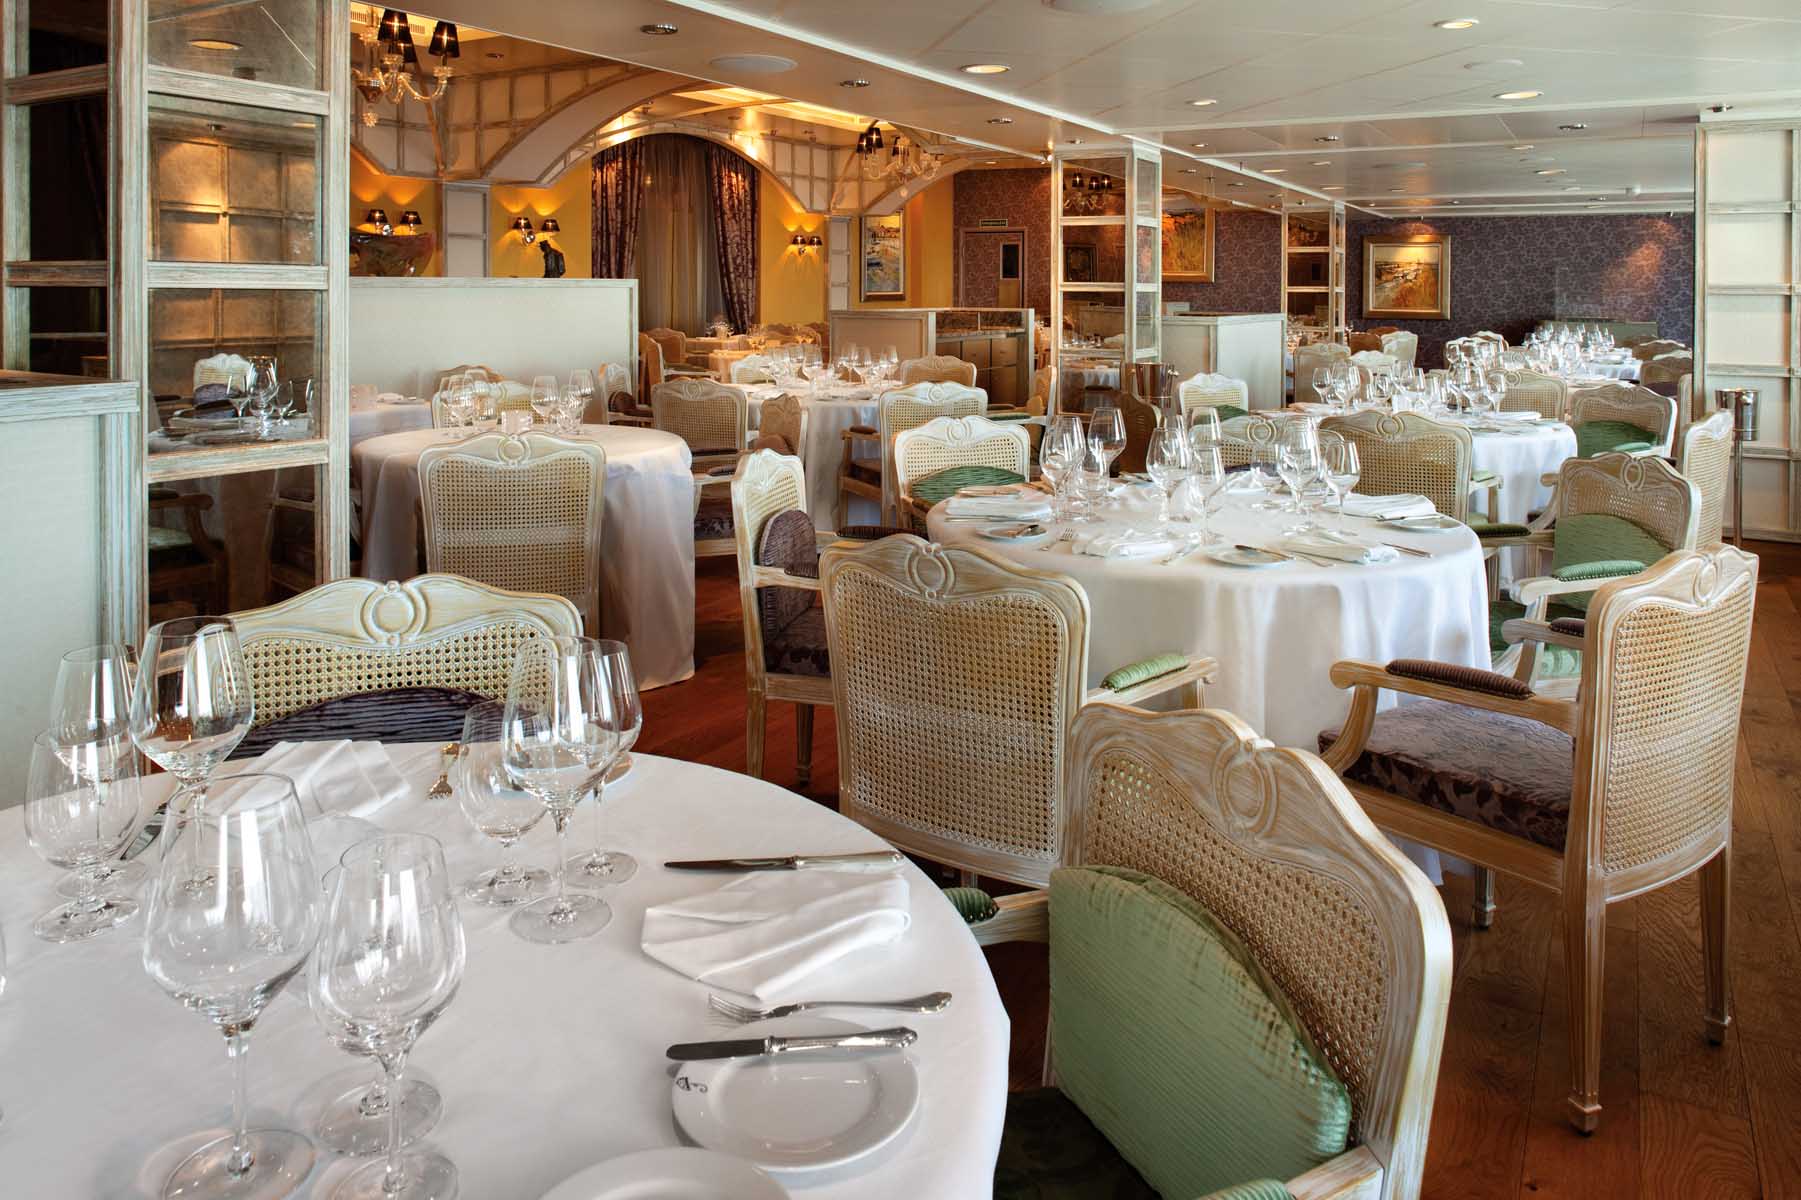 You'll enjoy a fine dining experience at Jacques restaurant on Oceania Riviera.